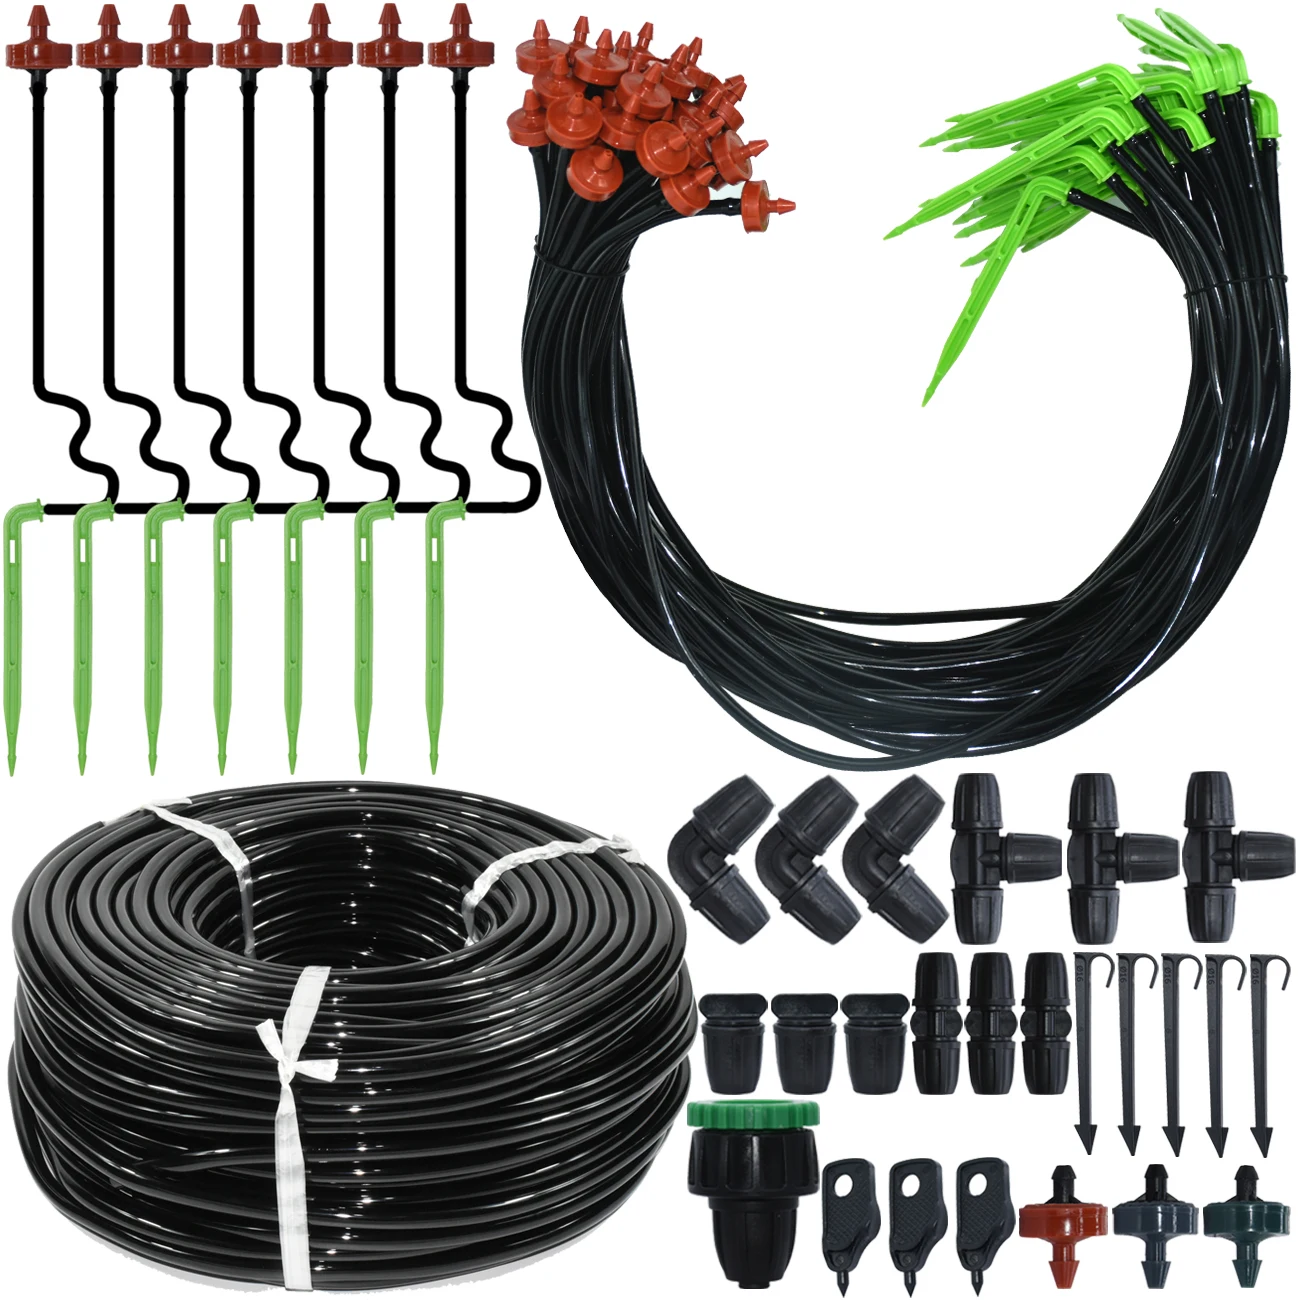 Sprycle 2L/H Drip Irrigation Bend Arrow Dripper Garden Watering System Kit 3/5mm 1/8'' Hose Plant Potted Bonsai Tools Greenhouse